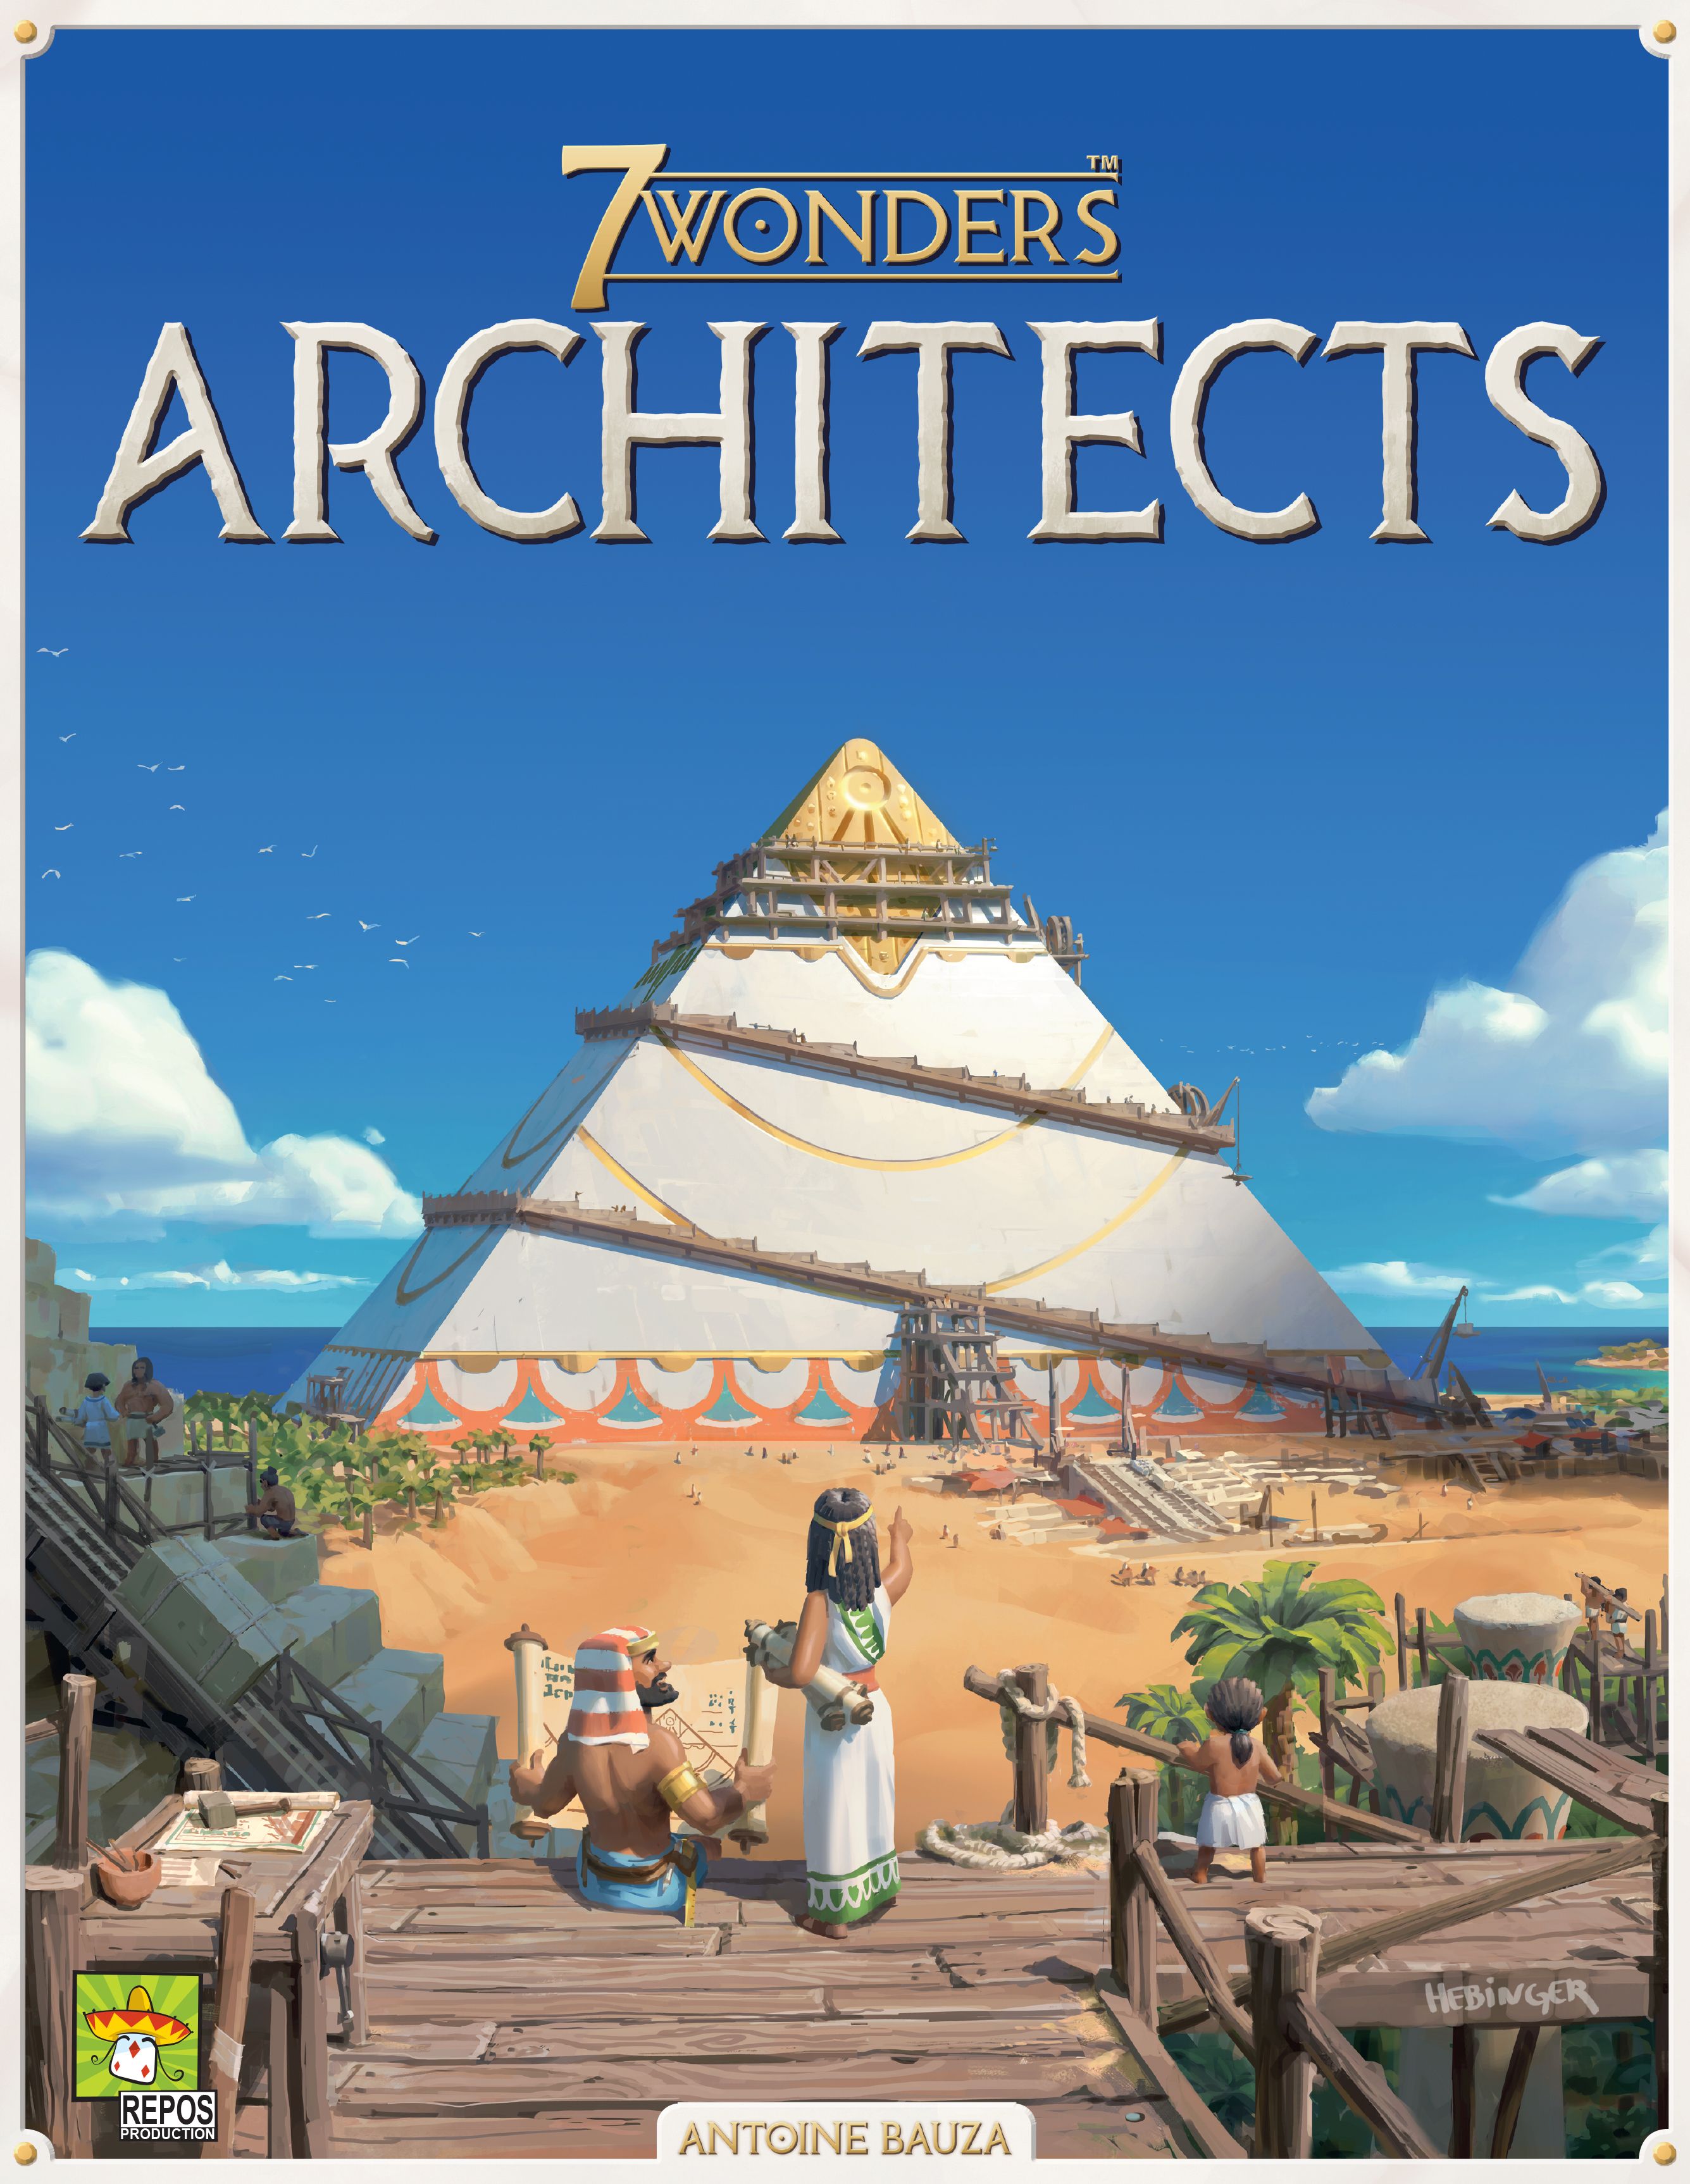 7 Wonders: Architects front face